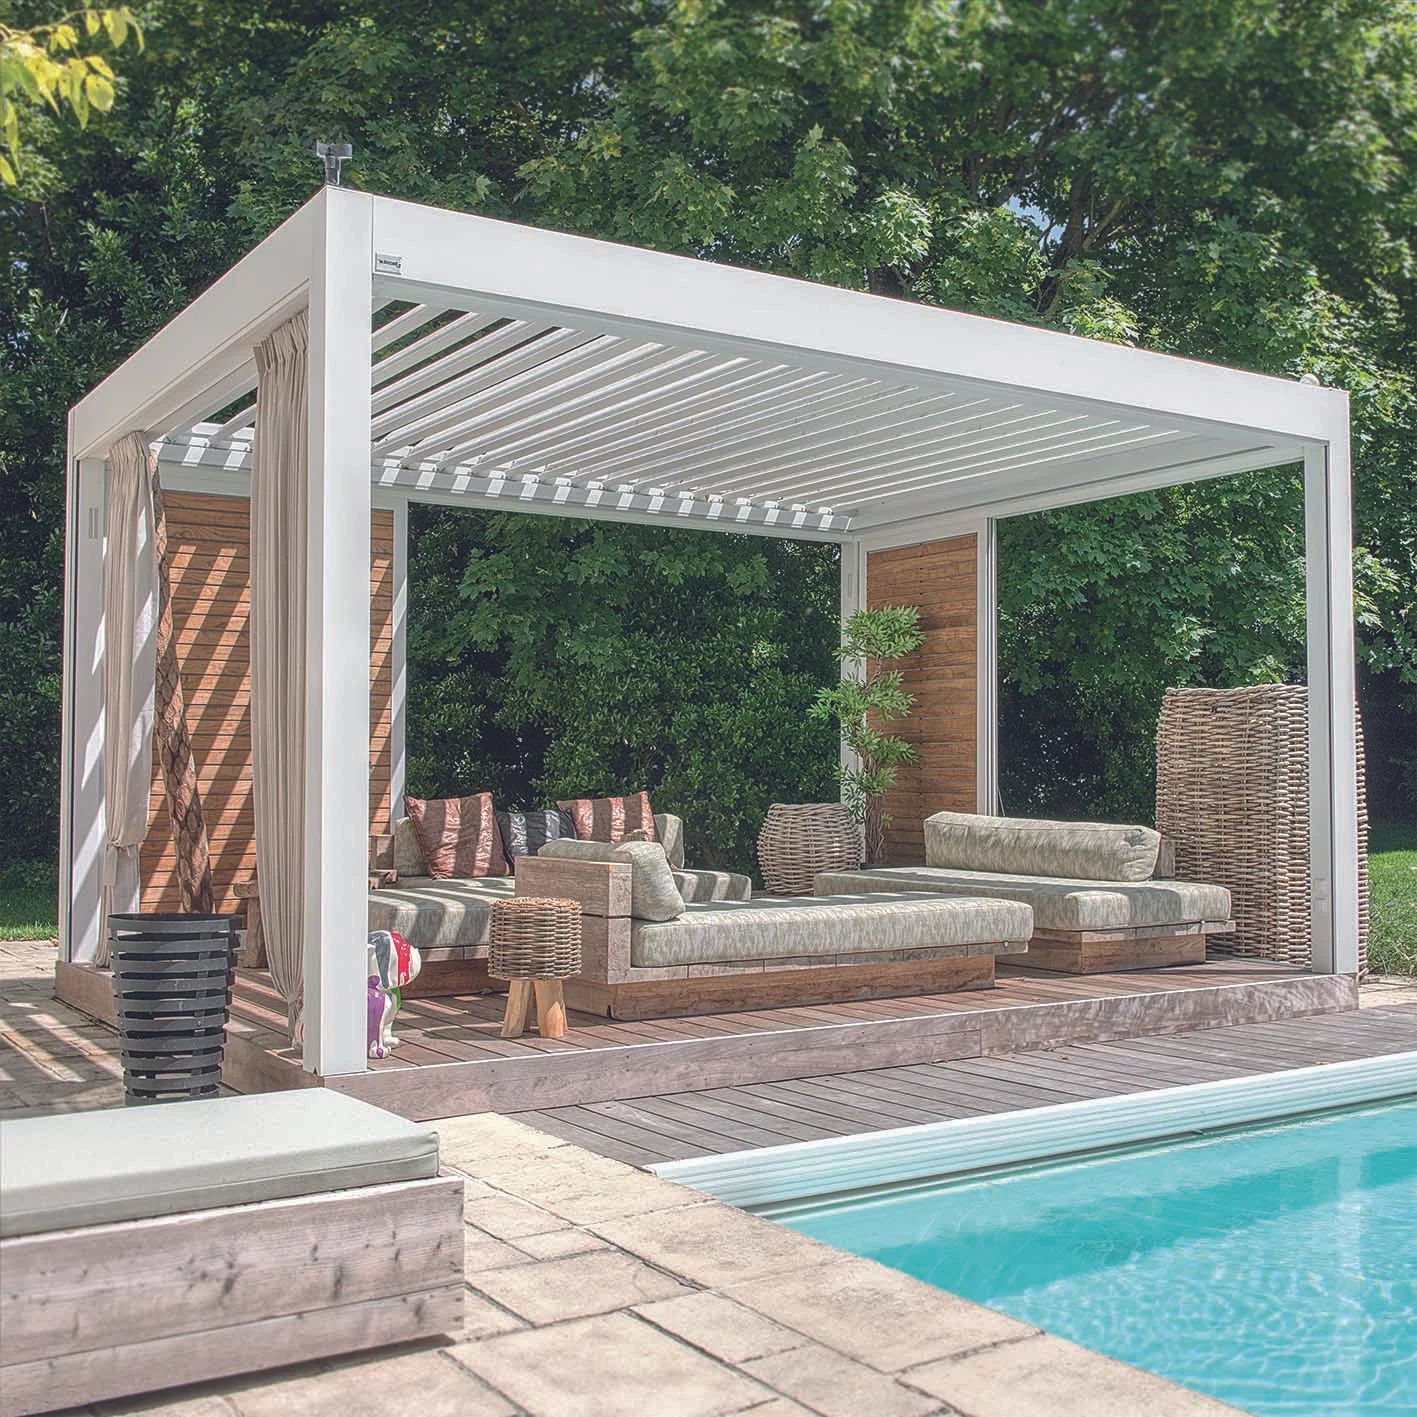 Pergola-structure-by-pool-sq (1)